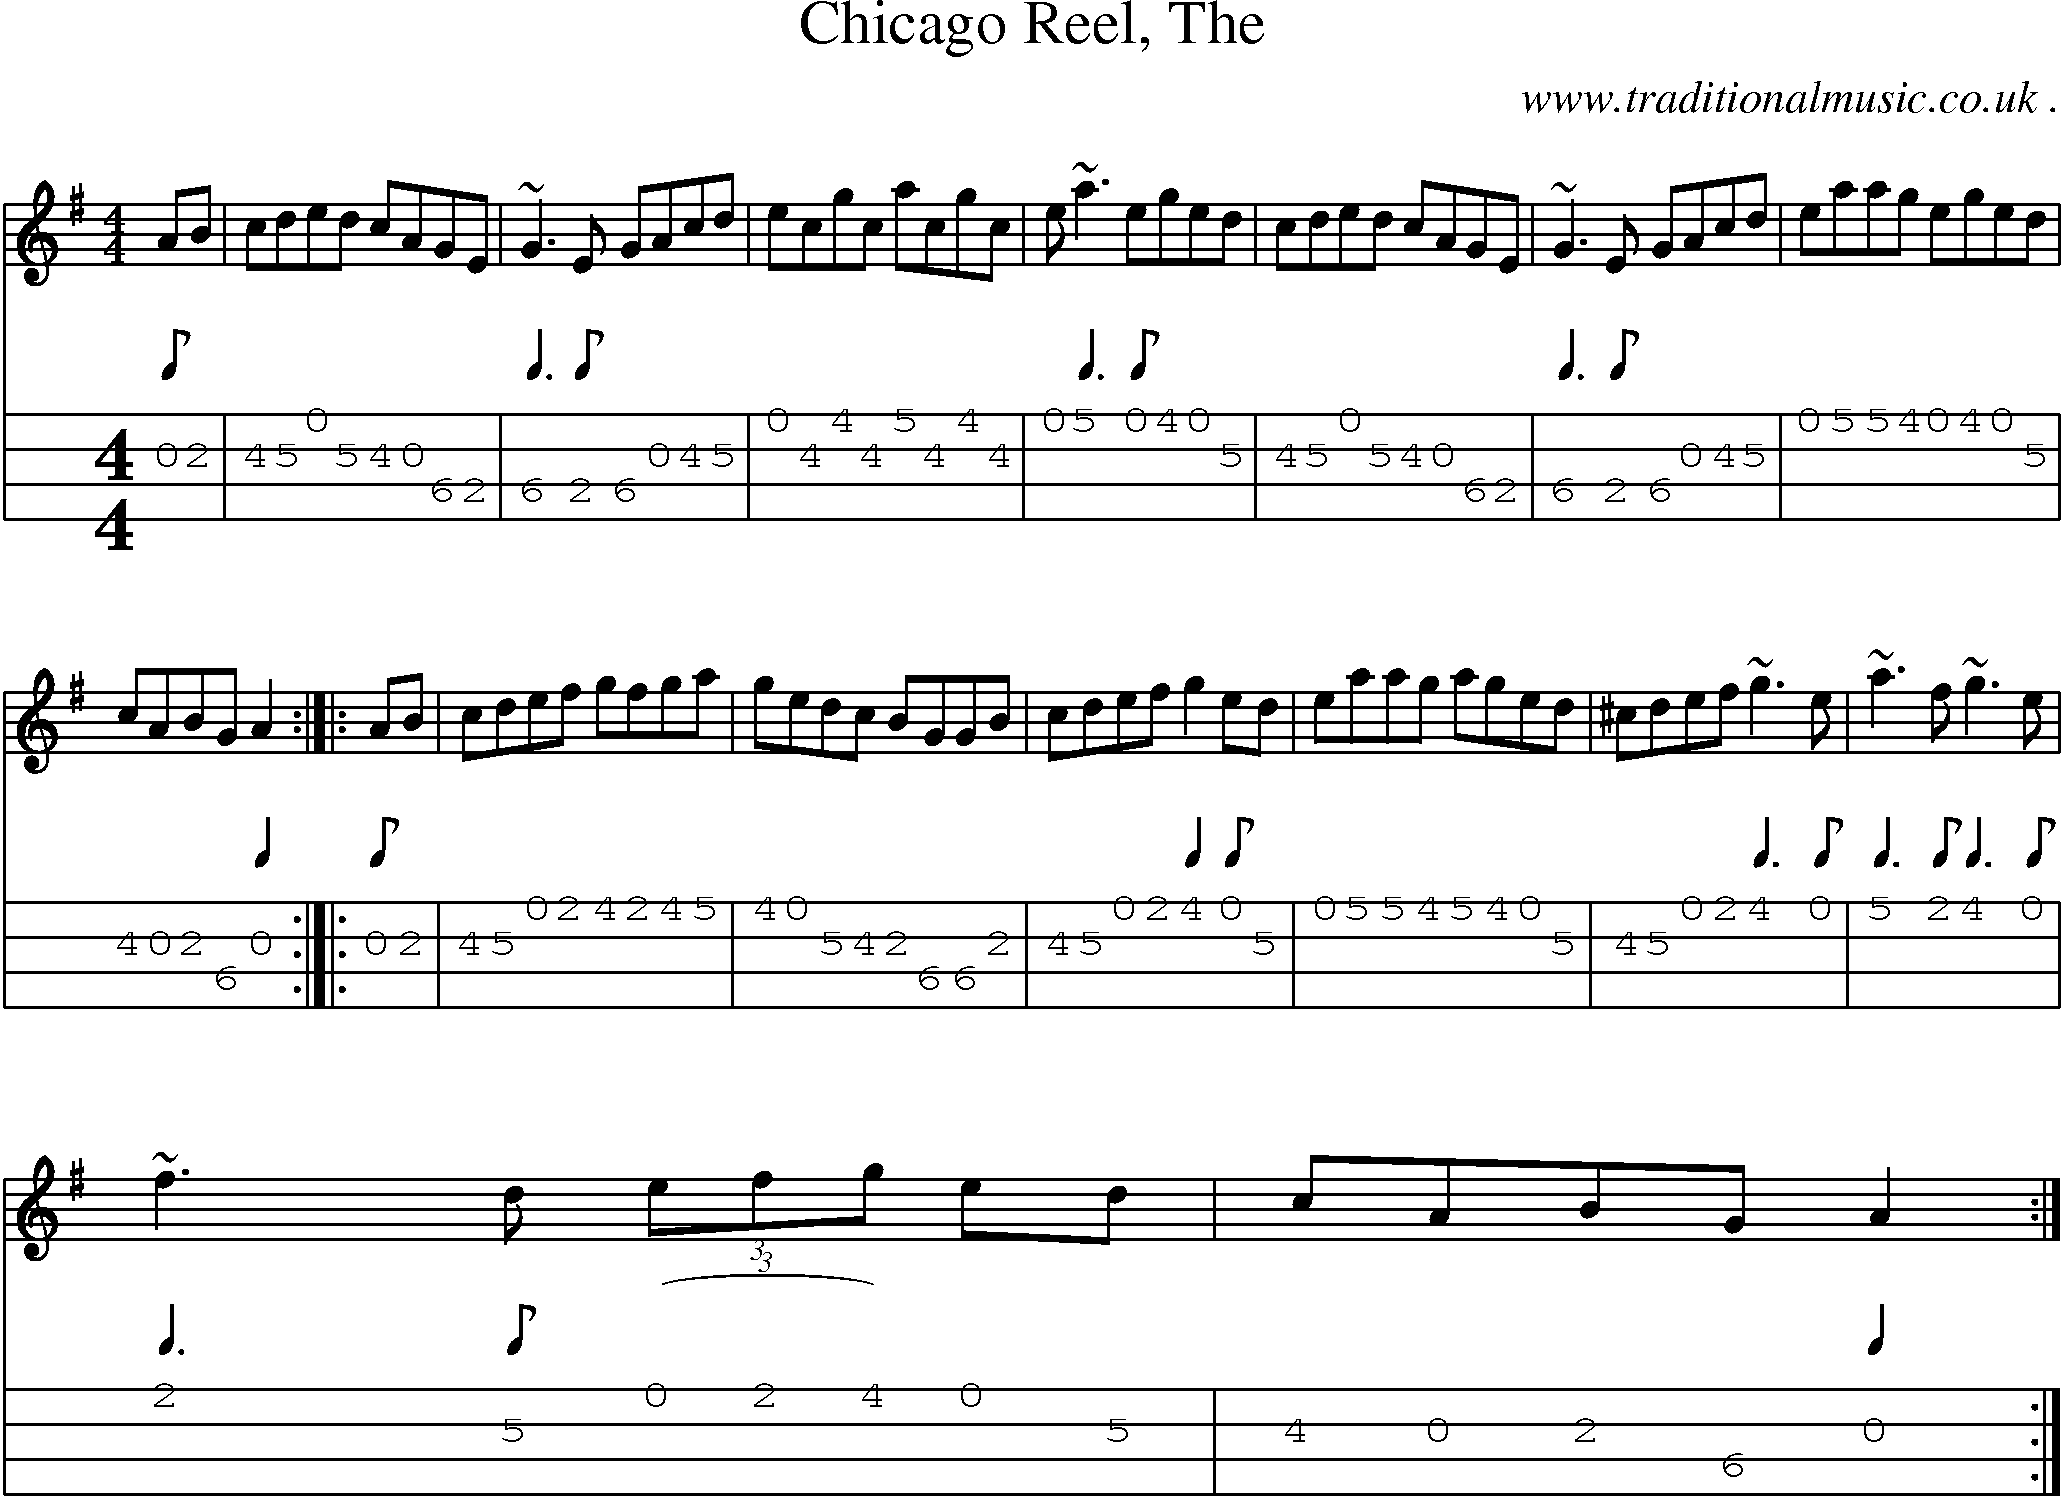 Music Score and Guitar Tabs for Chicago Reel The